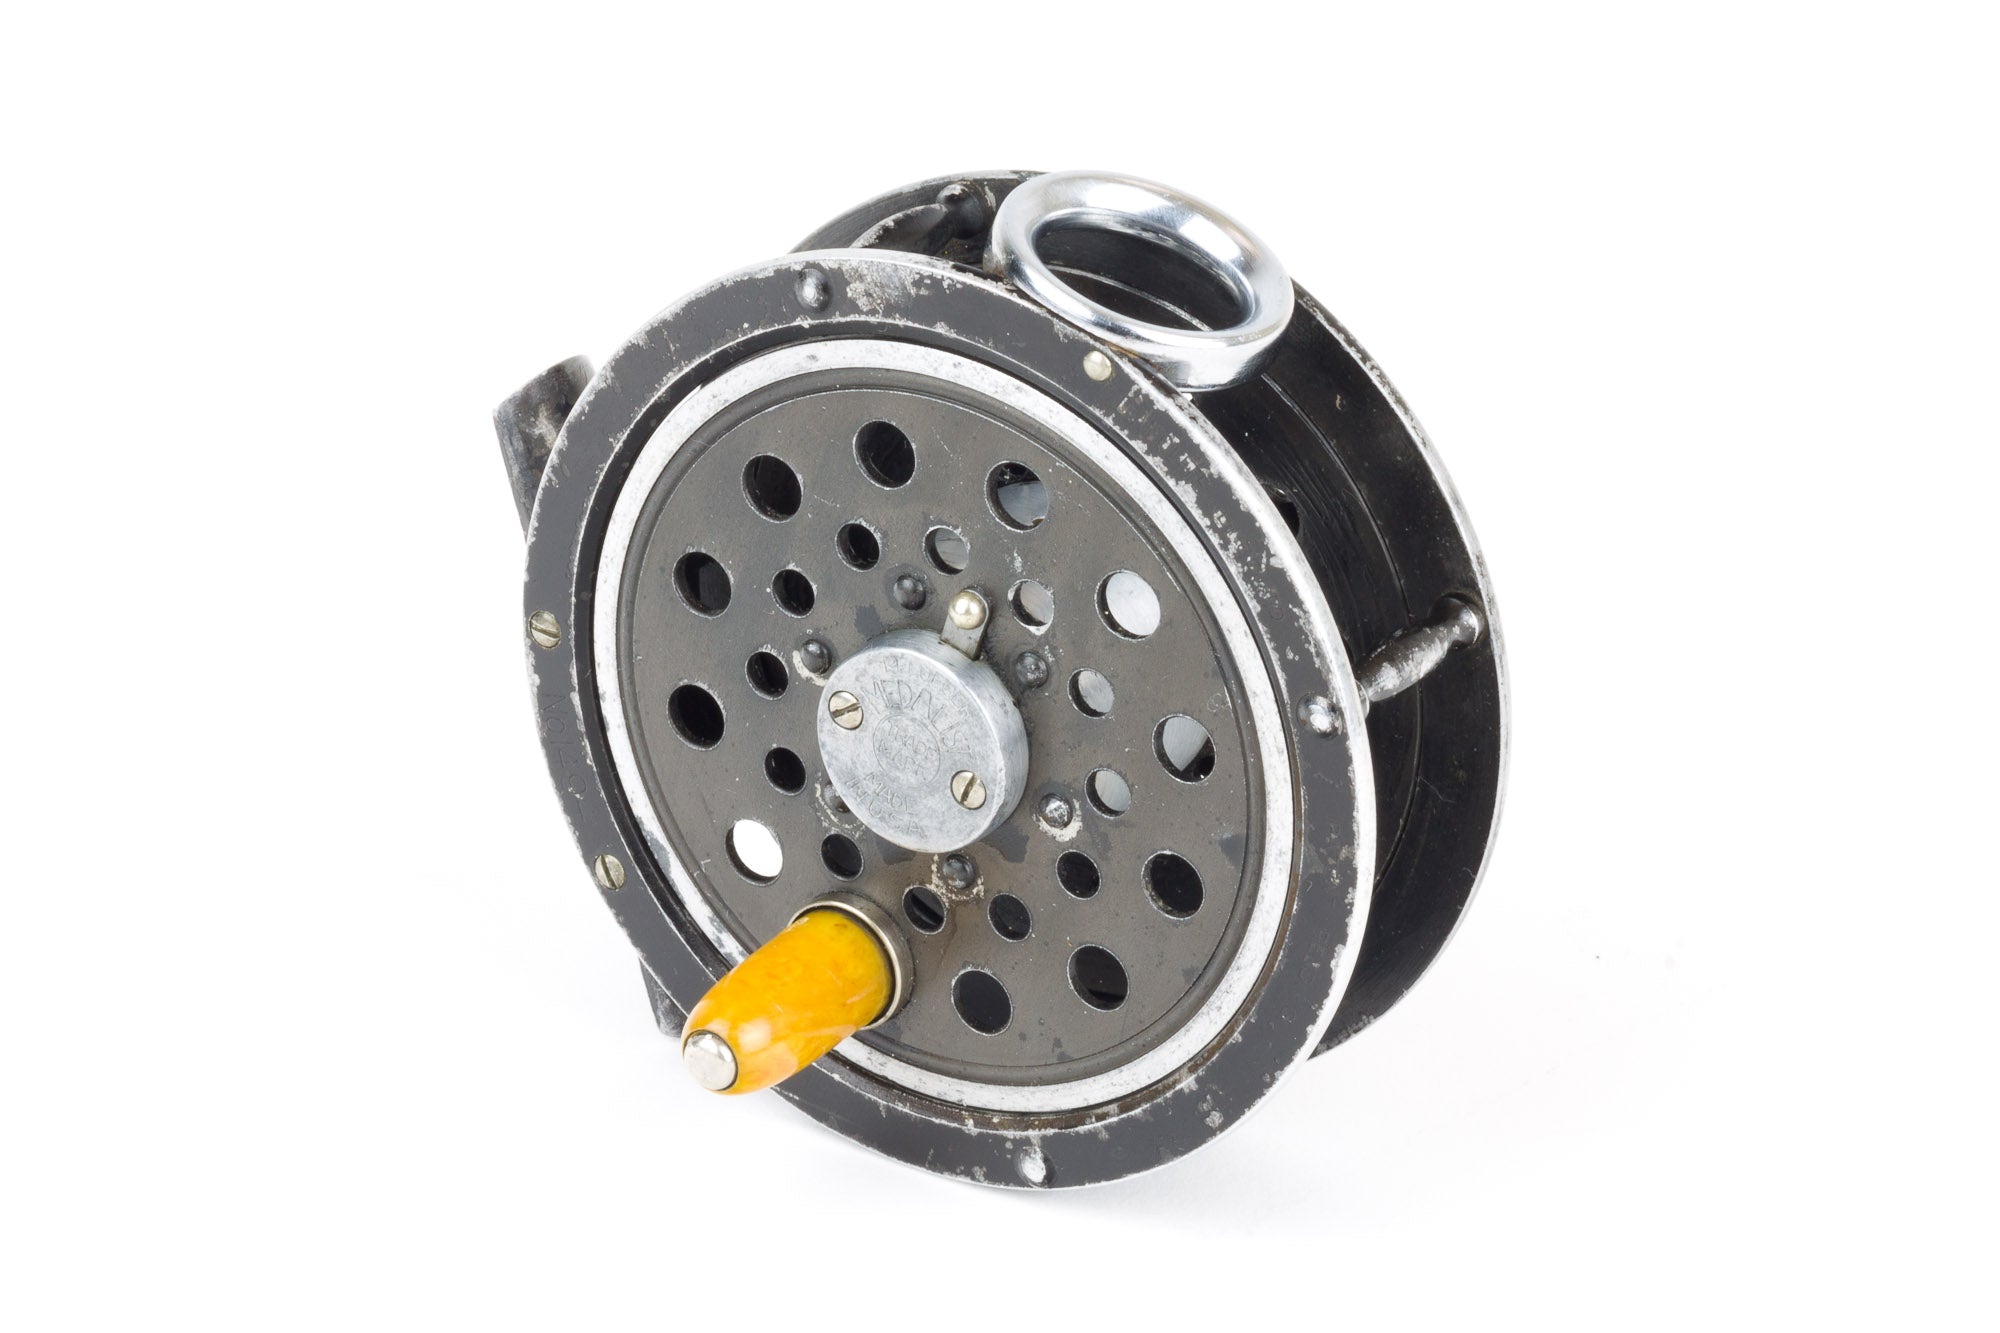 Please tell me about these old Medalists, Classic Fly Reels